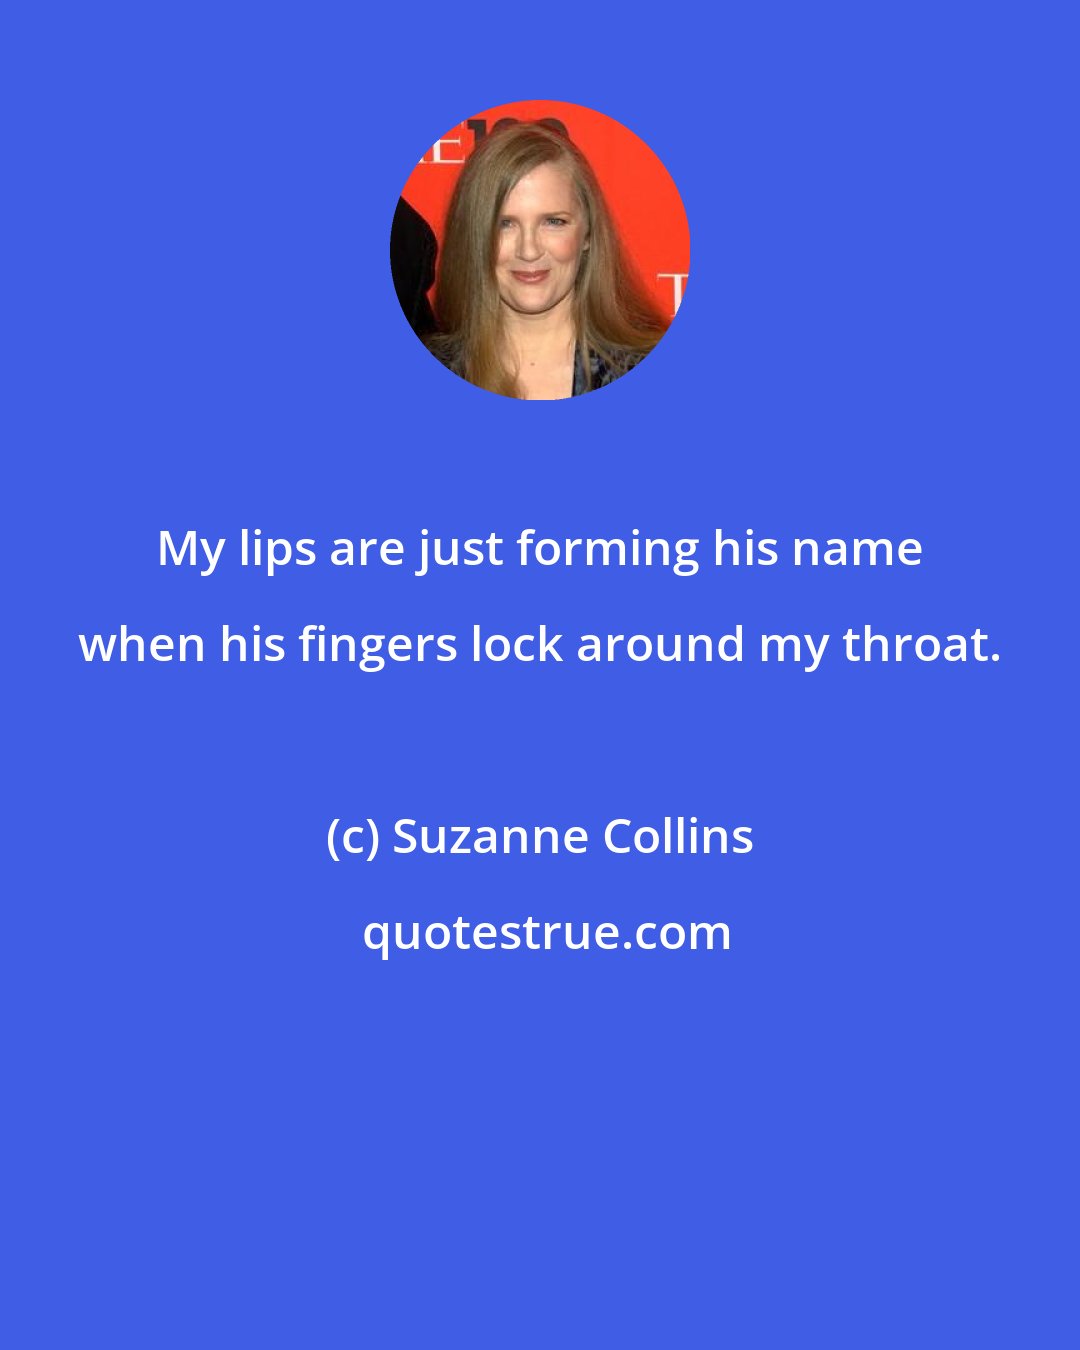 Suzanne Collins: My lips are just forming his name when his fingers lock around my throat.